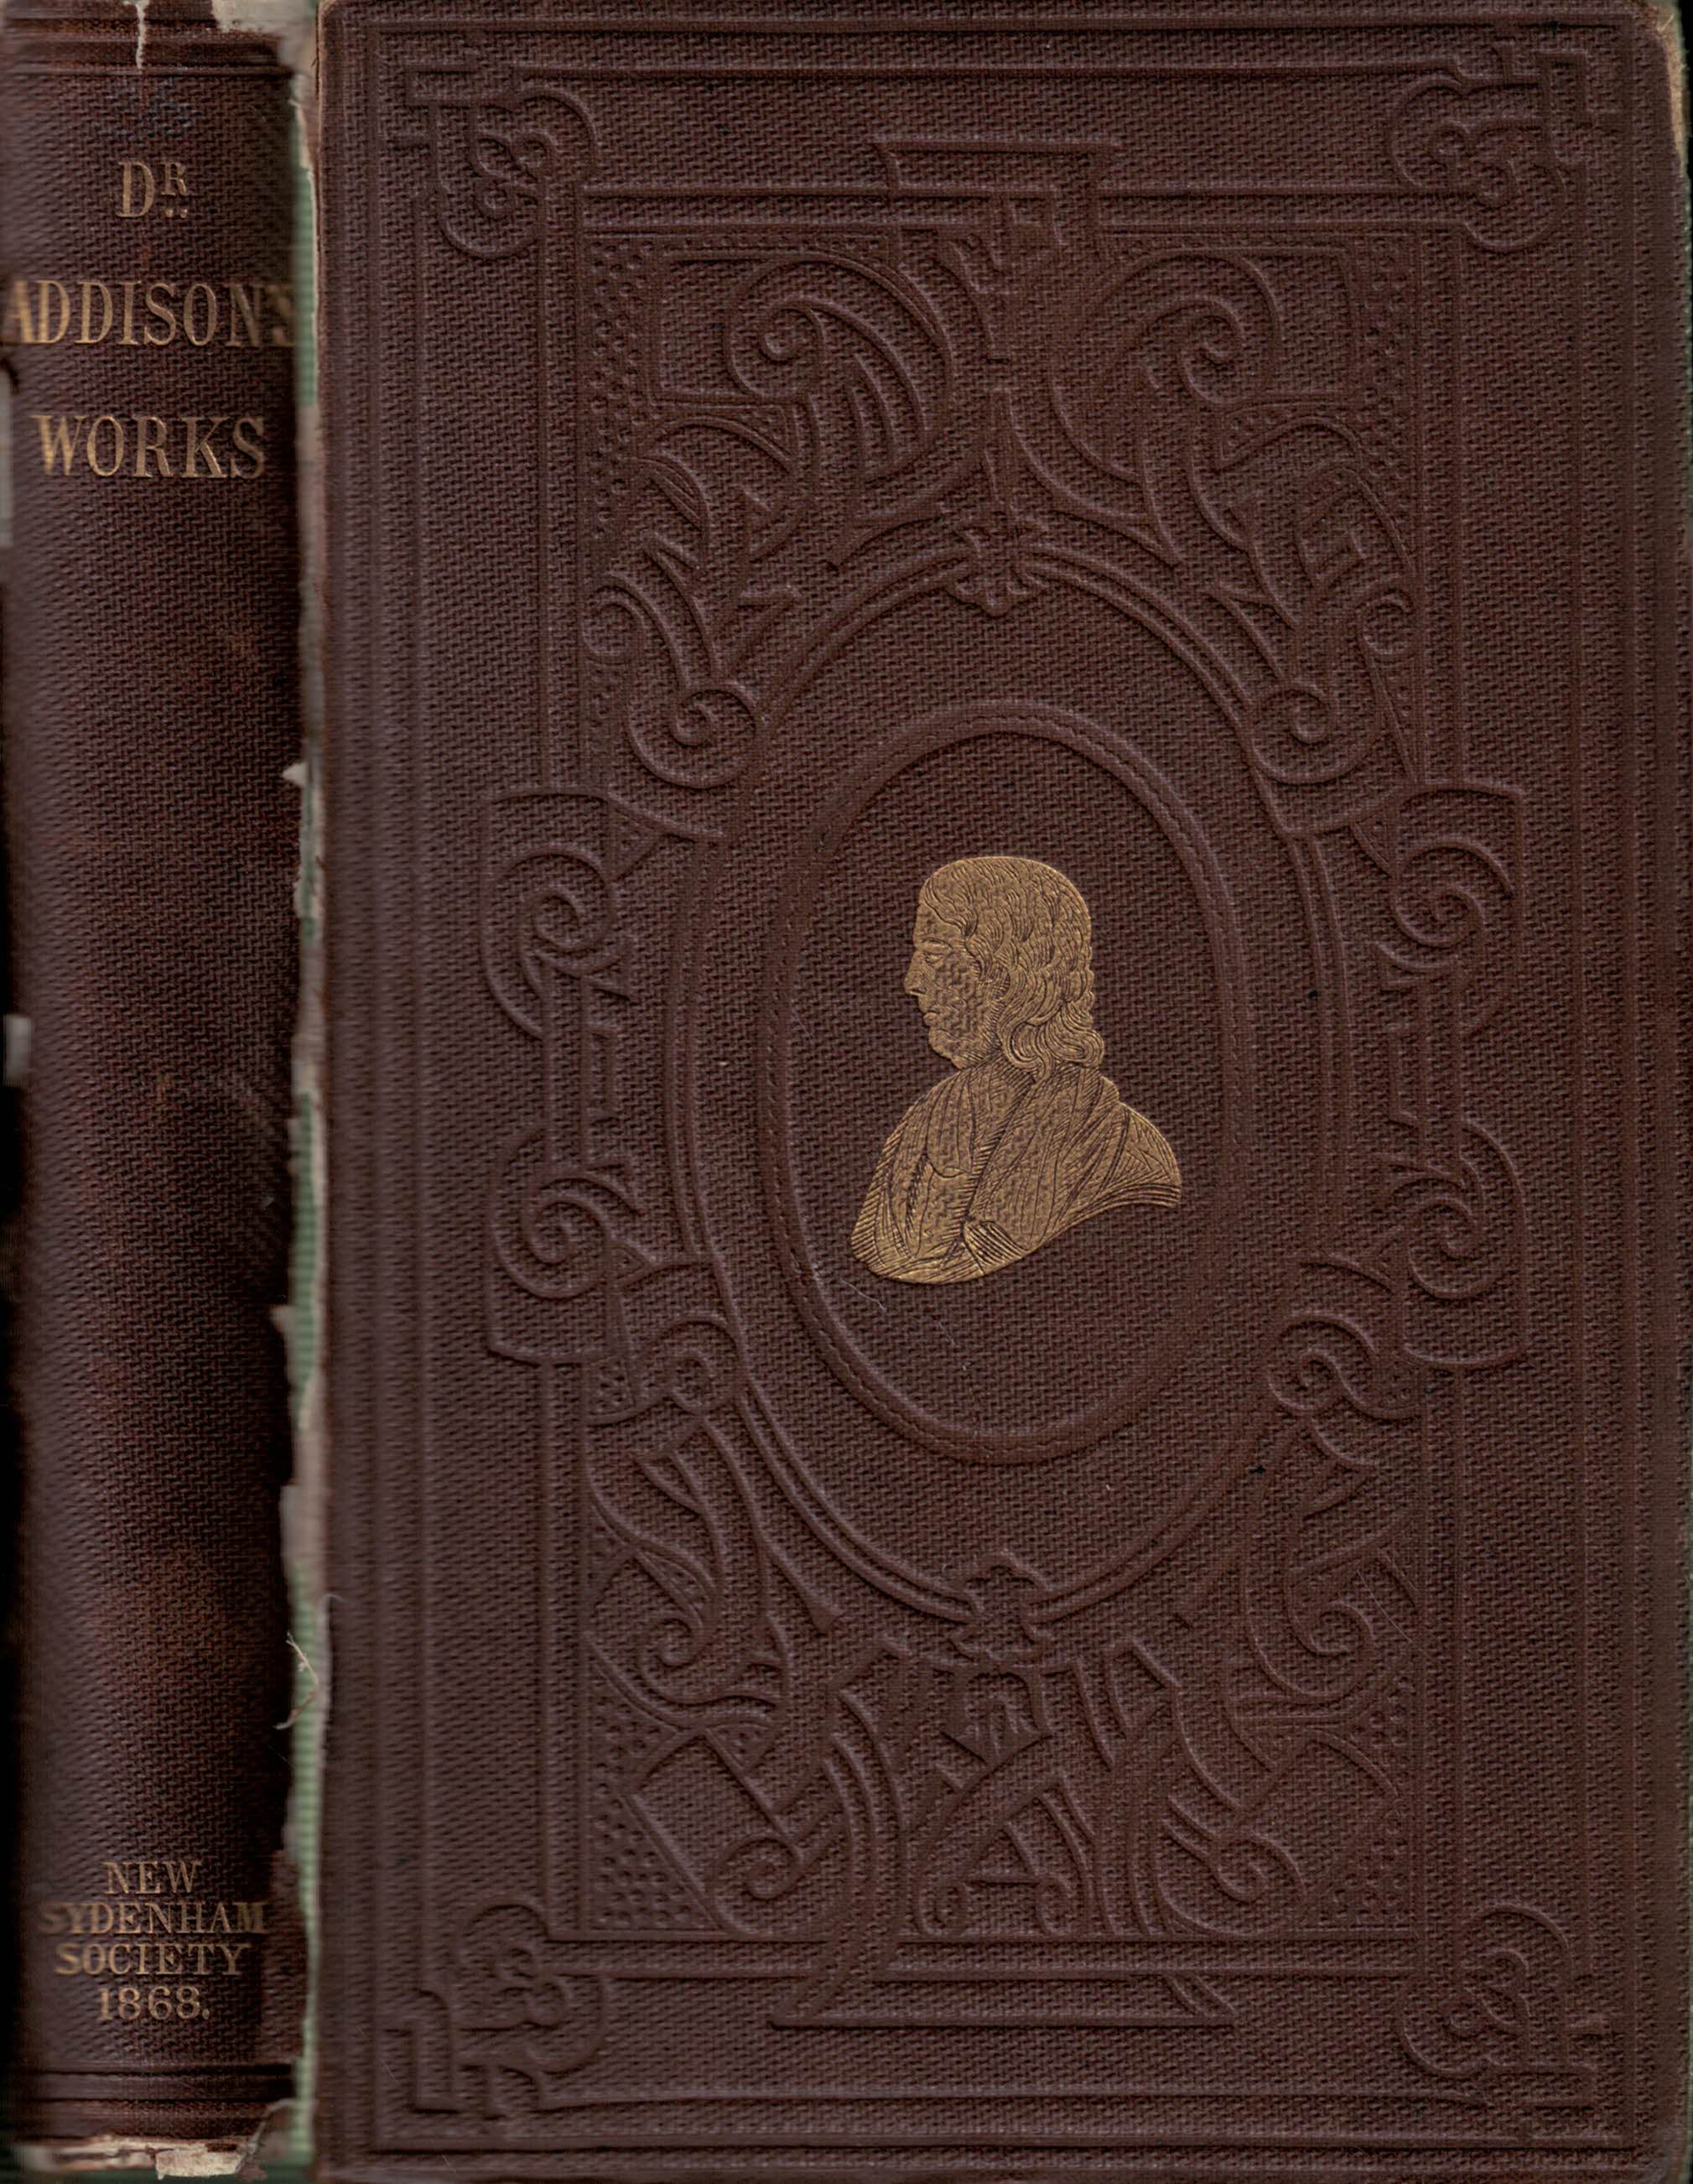 A Collection of the Published Writings of the Late Thomas Addison, M.D. The New Sydenham Society, volume 36.